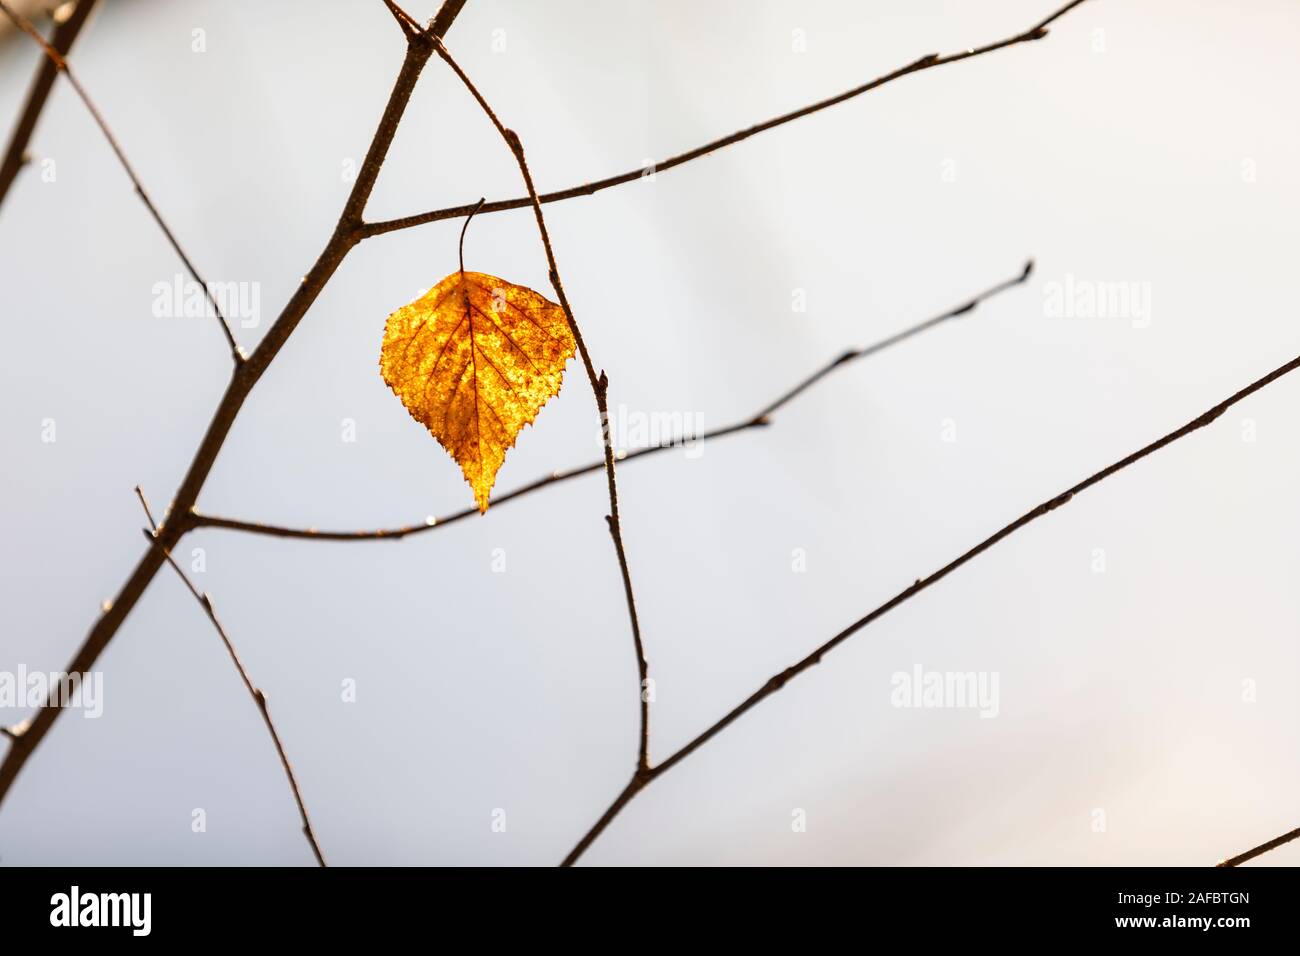 Closeup of dry golden tree leaf on a branch Stock Photo